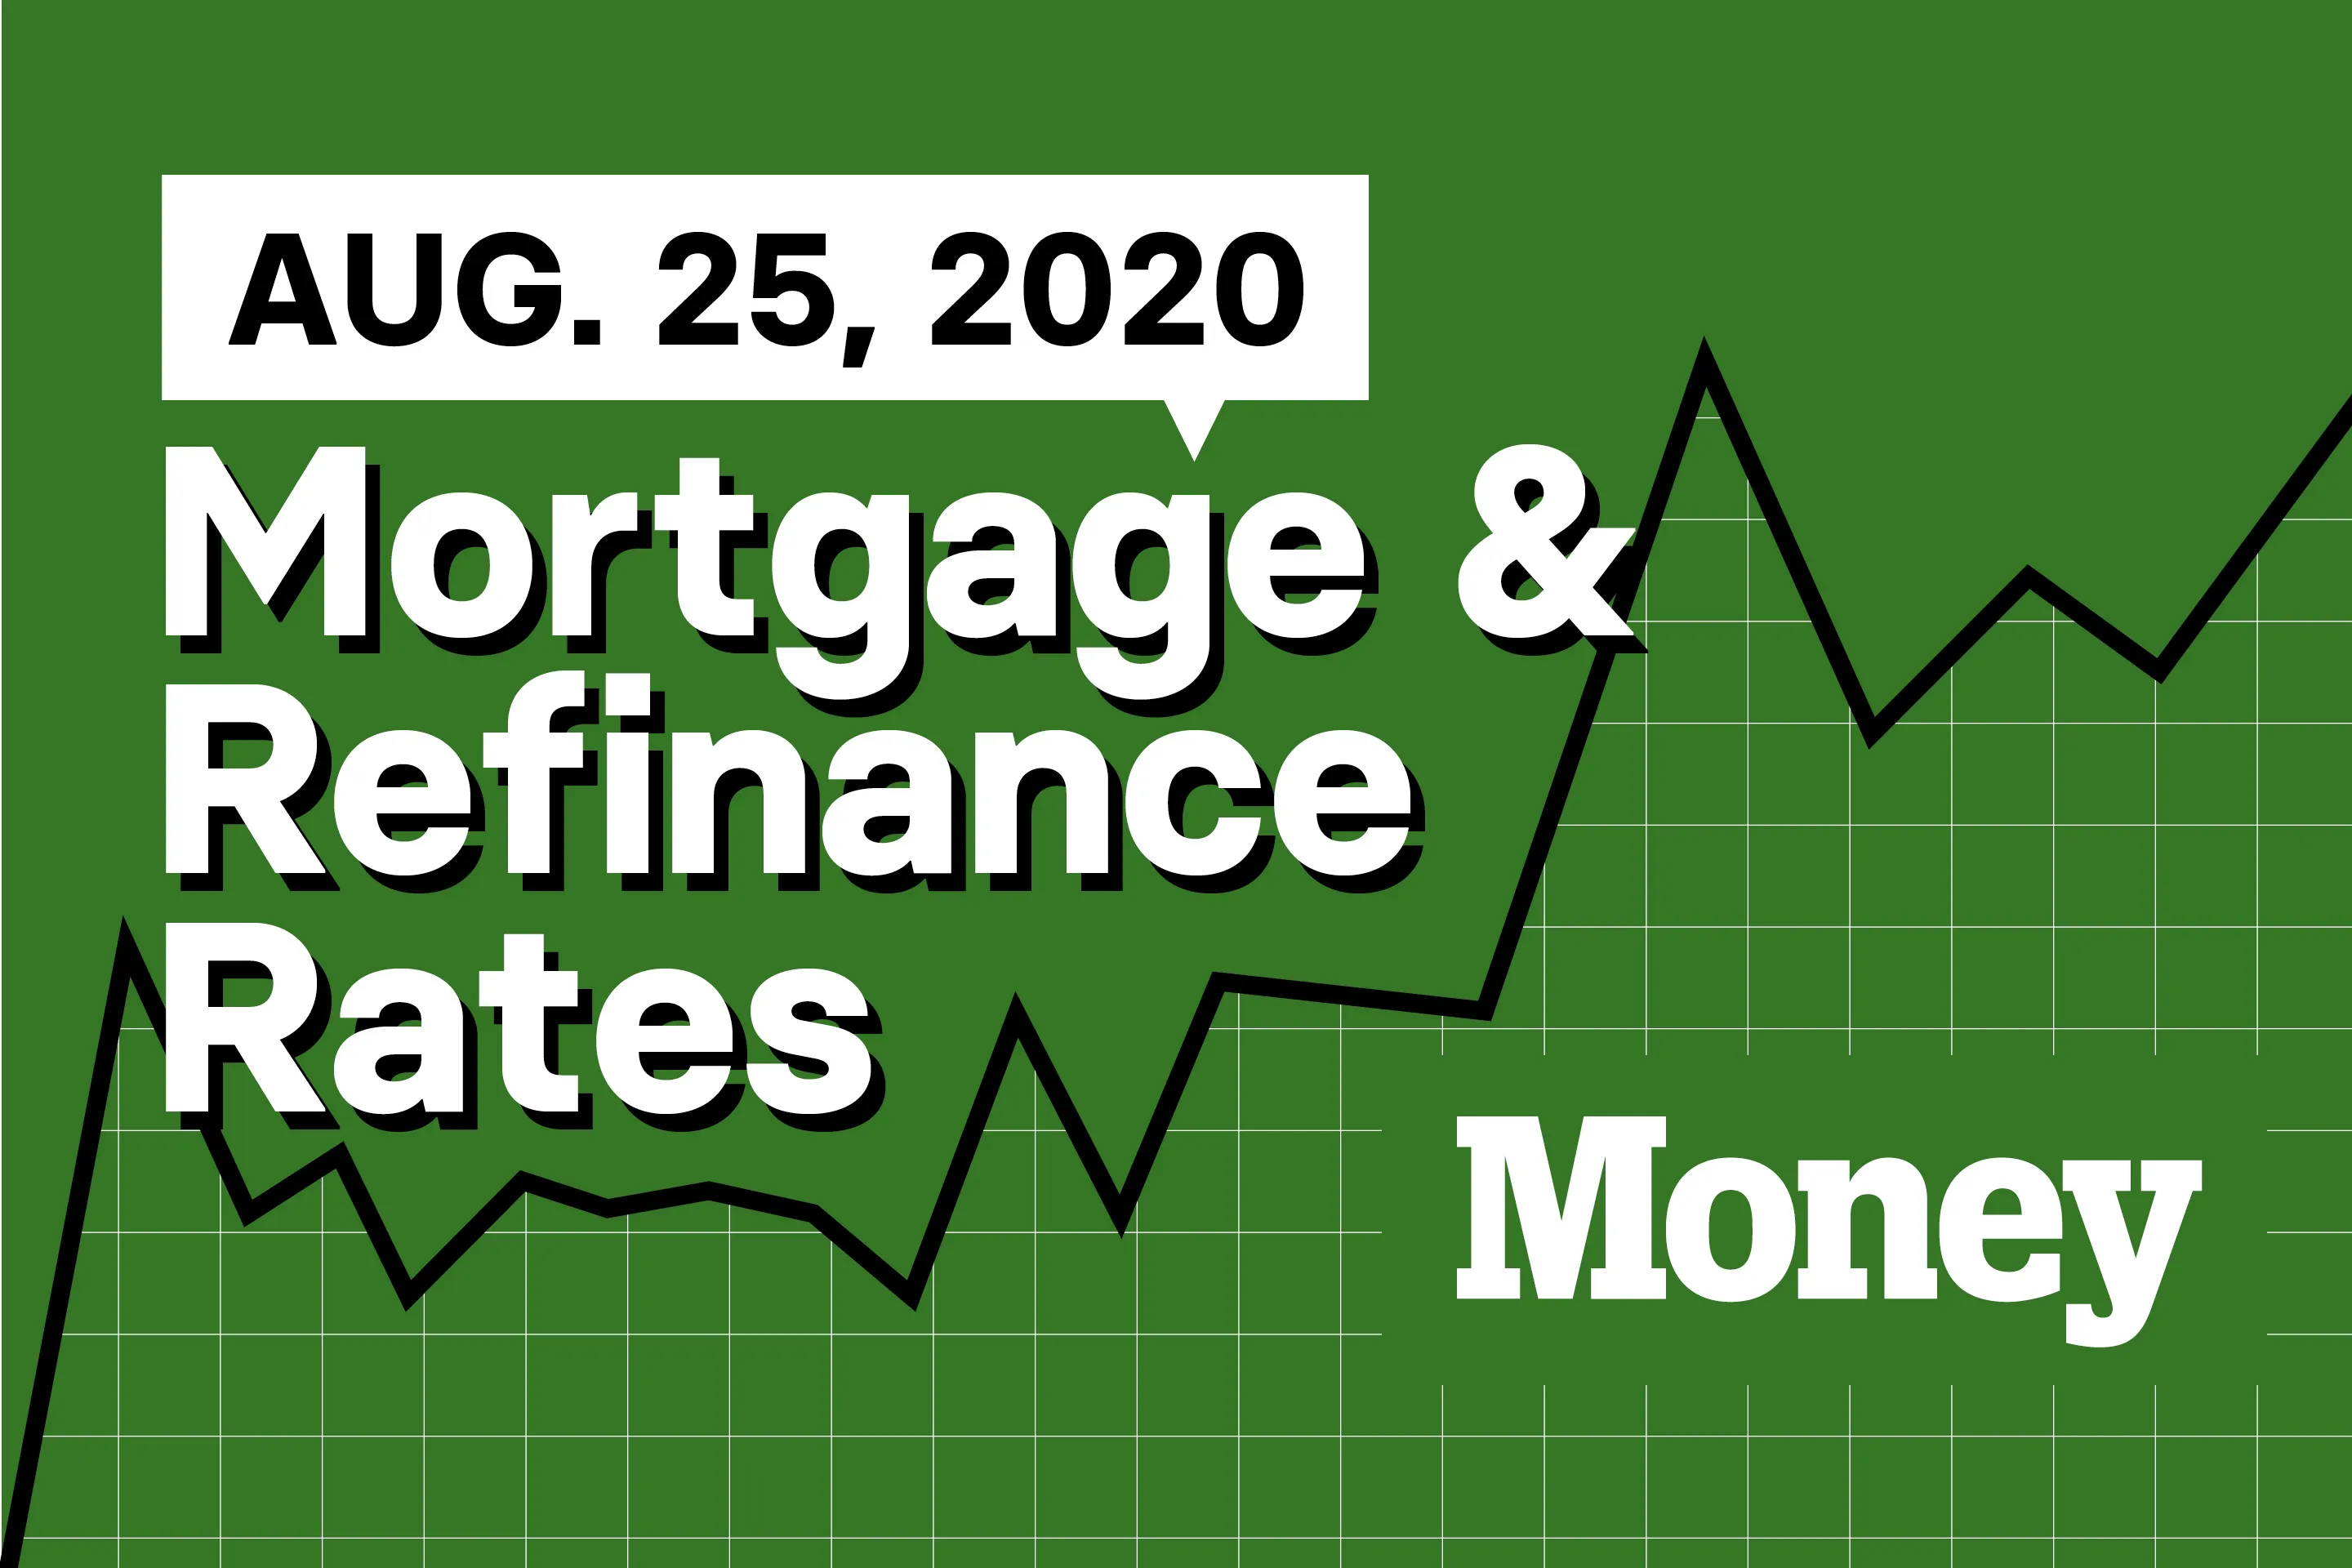 Here Are Today's Best Mortgage & Refinance Rates for August 25, 2020